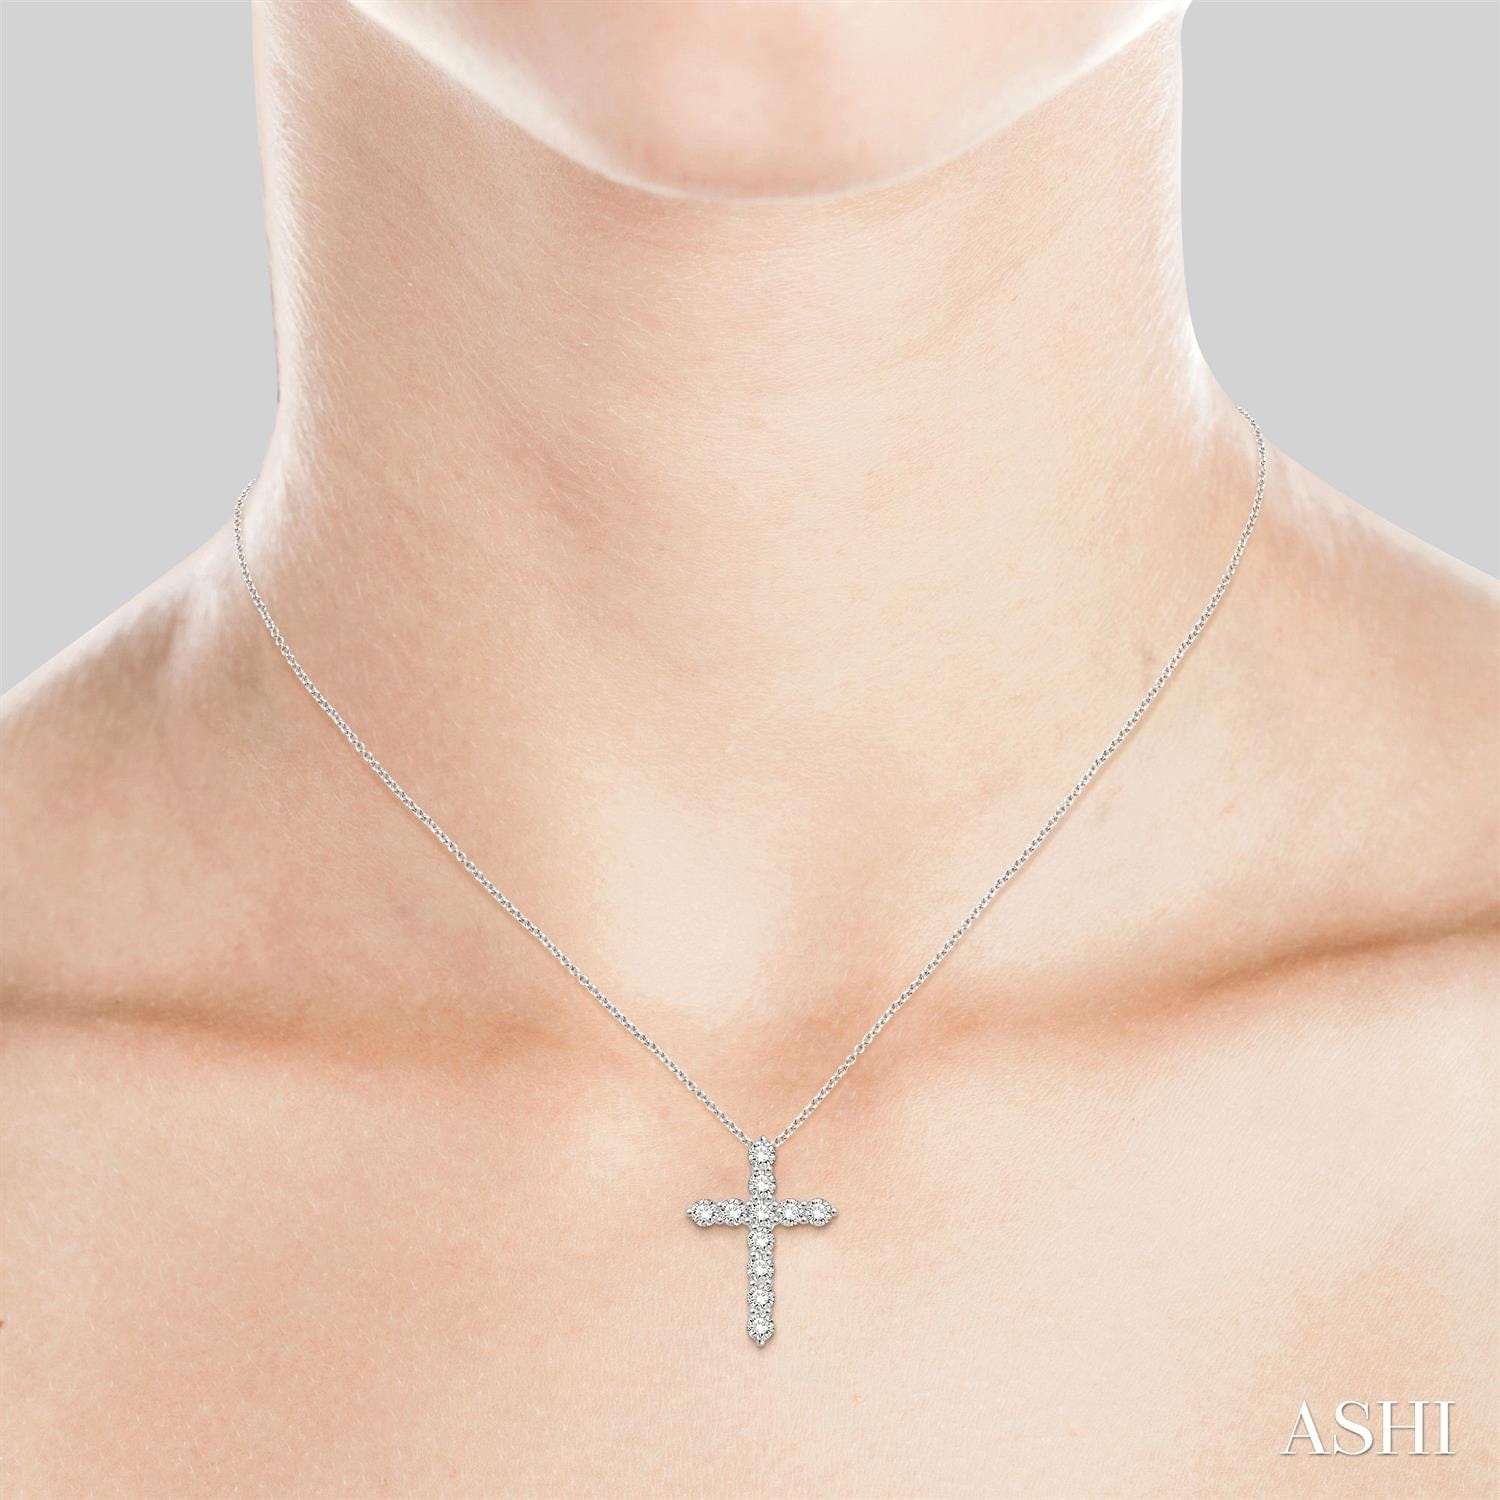 Diamond Cross Necklace | Cross Necklace | diamond cross necklace